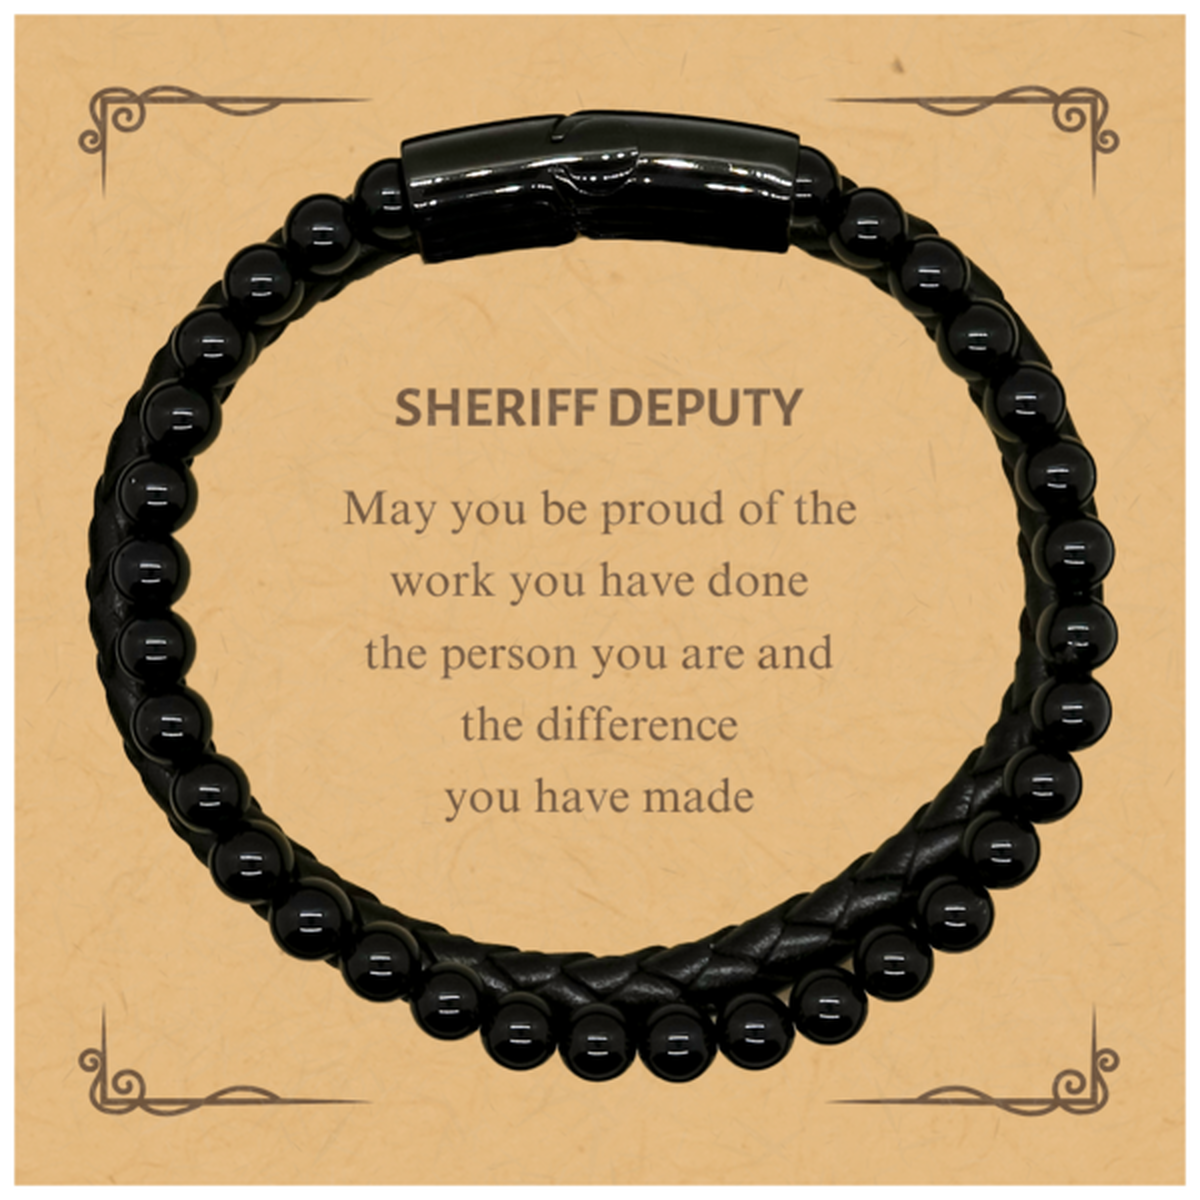 Sheriff Deputy May you be proud of the work you have done, Retirement Sheriff Deputy Stone Leather Bracelets for Colleague Appreciation Gifts Amazing for Sheriff Deputy